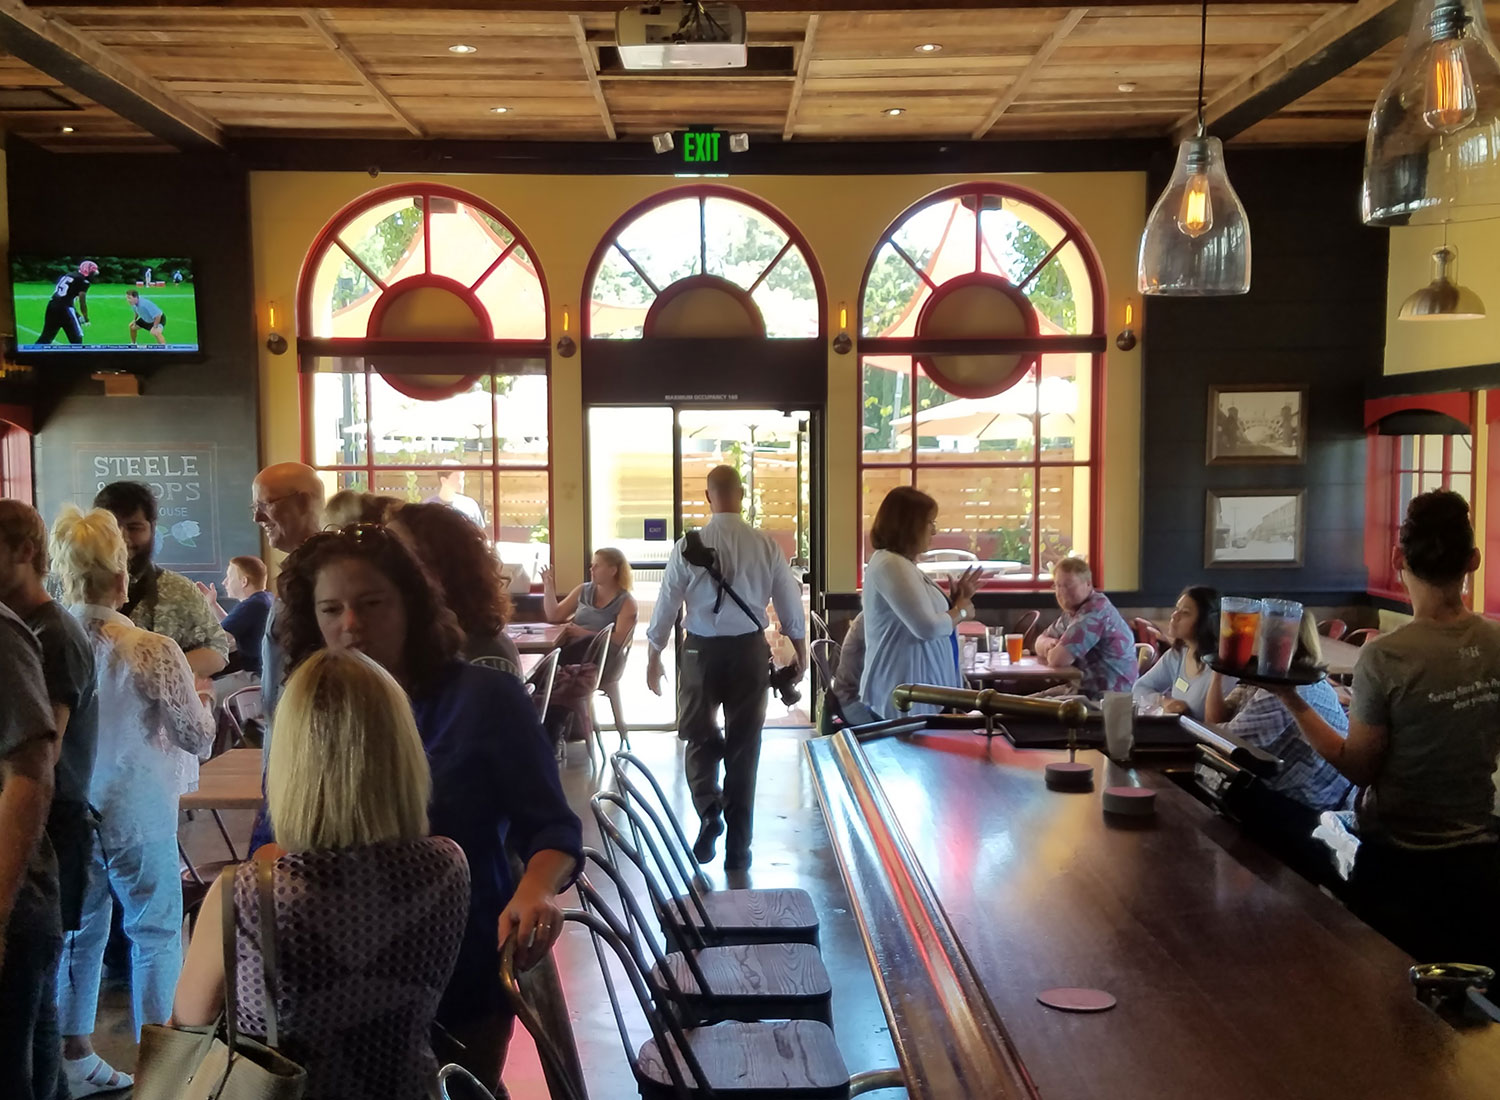 Steele and Hops, a brew pub in Santa Rosa, has opened. Heather Irwin